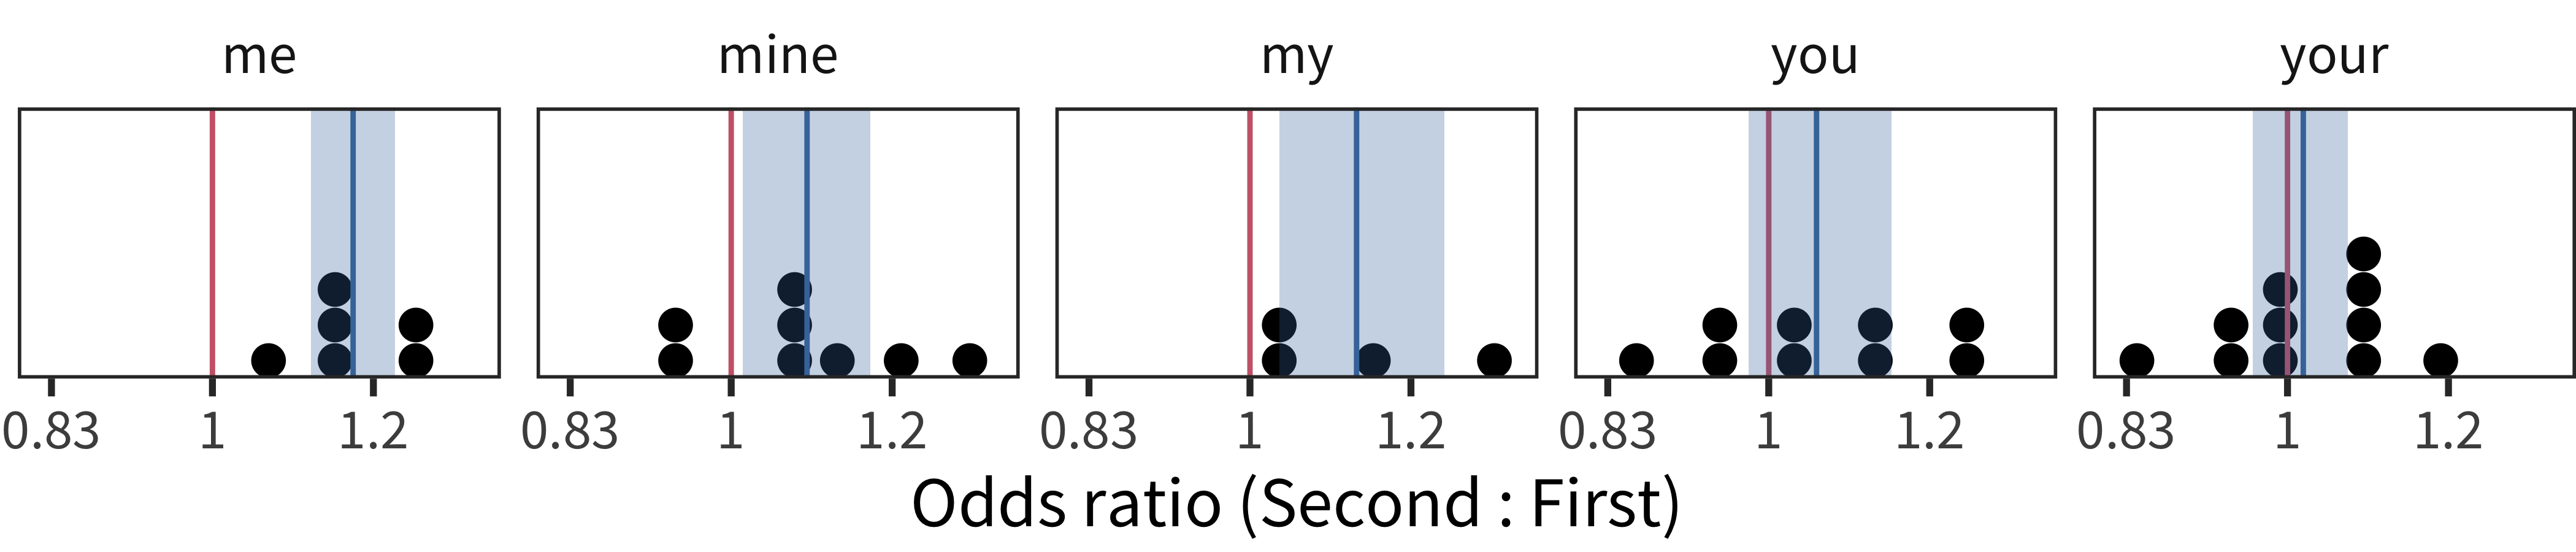 Histogram showing item random effects for personal pronouns by birth order, with each point representing the effect in a given language.Red lines marks no effect, blue lines marks the mean, and blue bands shows bootstrapped 95\% confidence intervals.